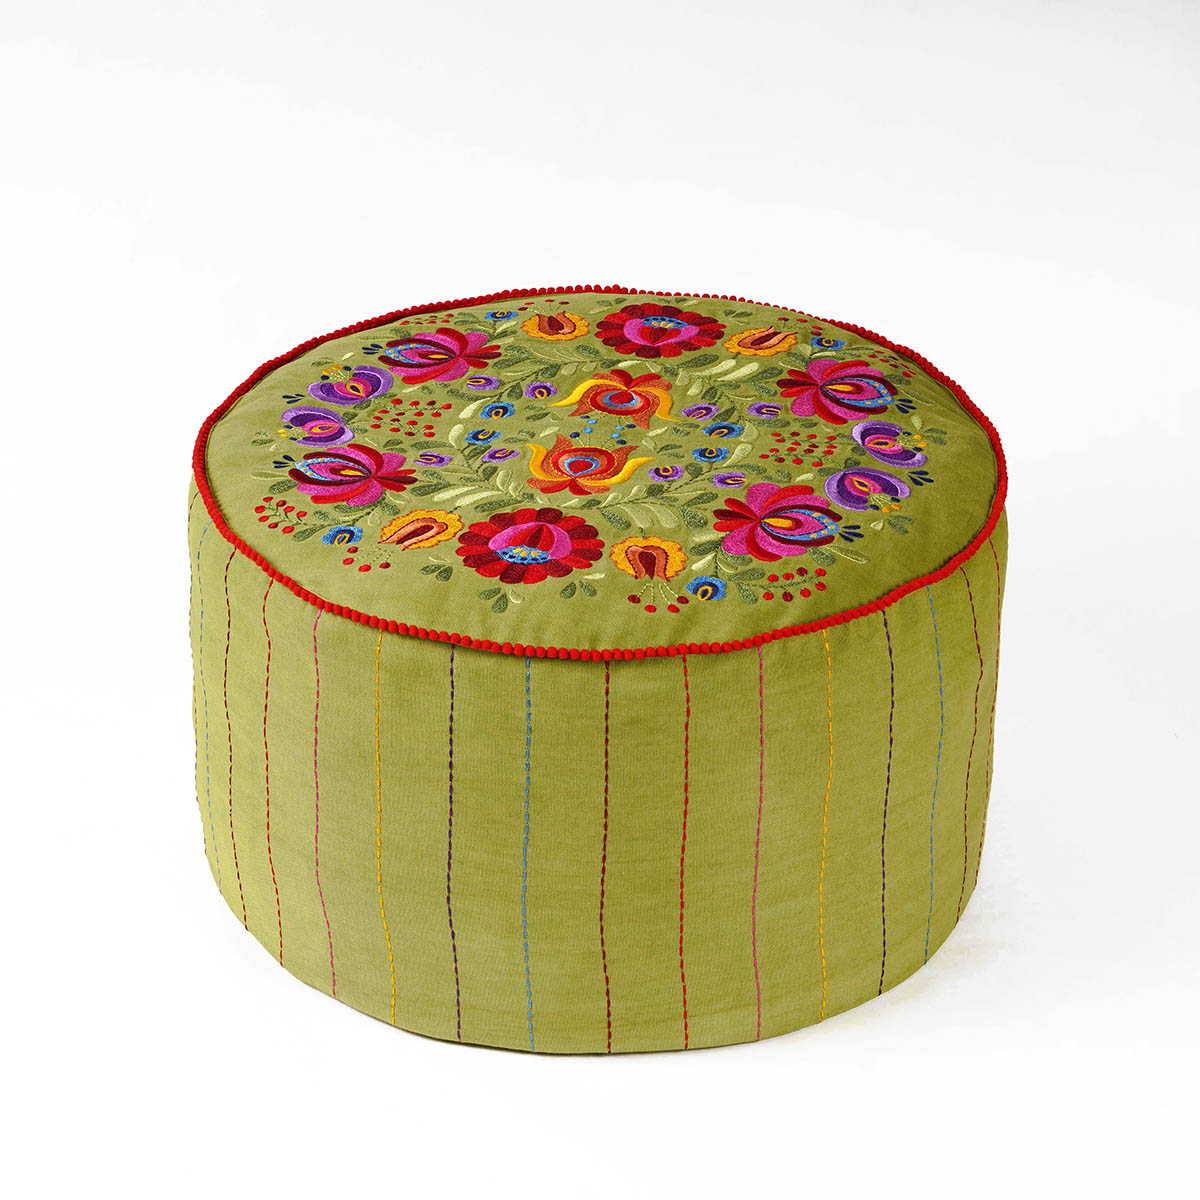 Matyo - Embroidered boho pouf cover, Green with multicolour rose embroidery ottoman cover